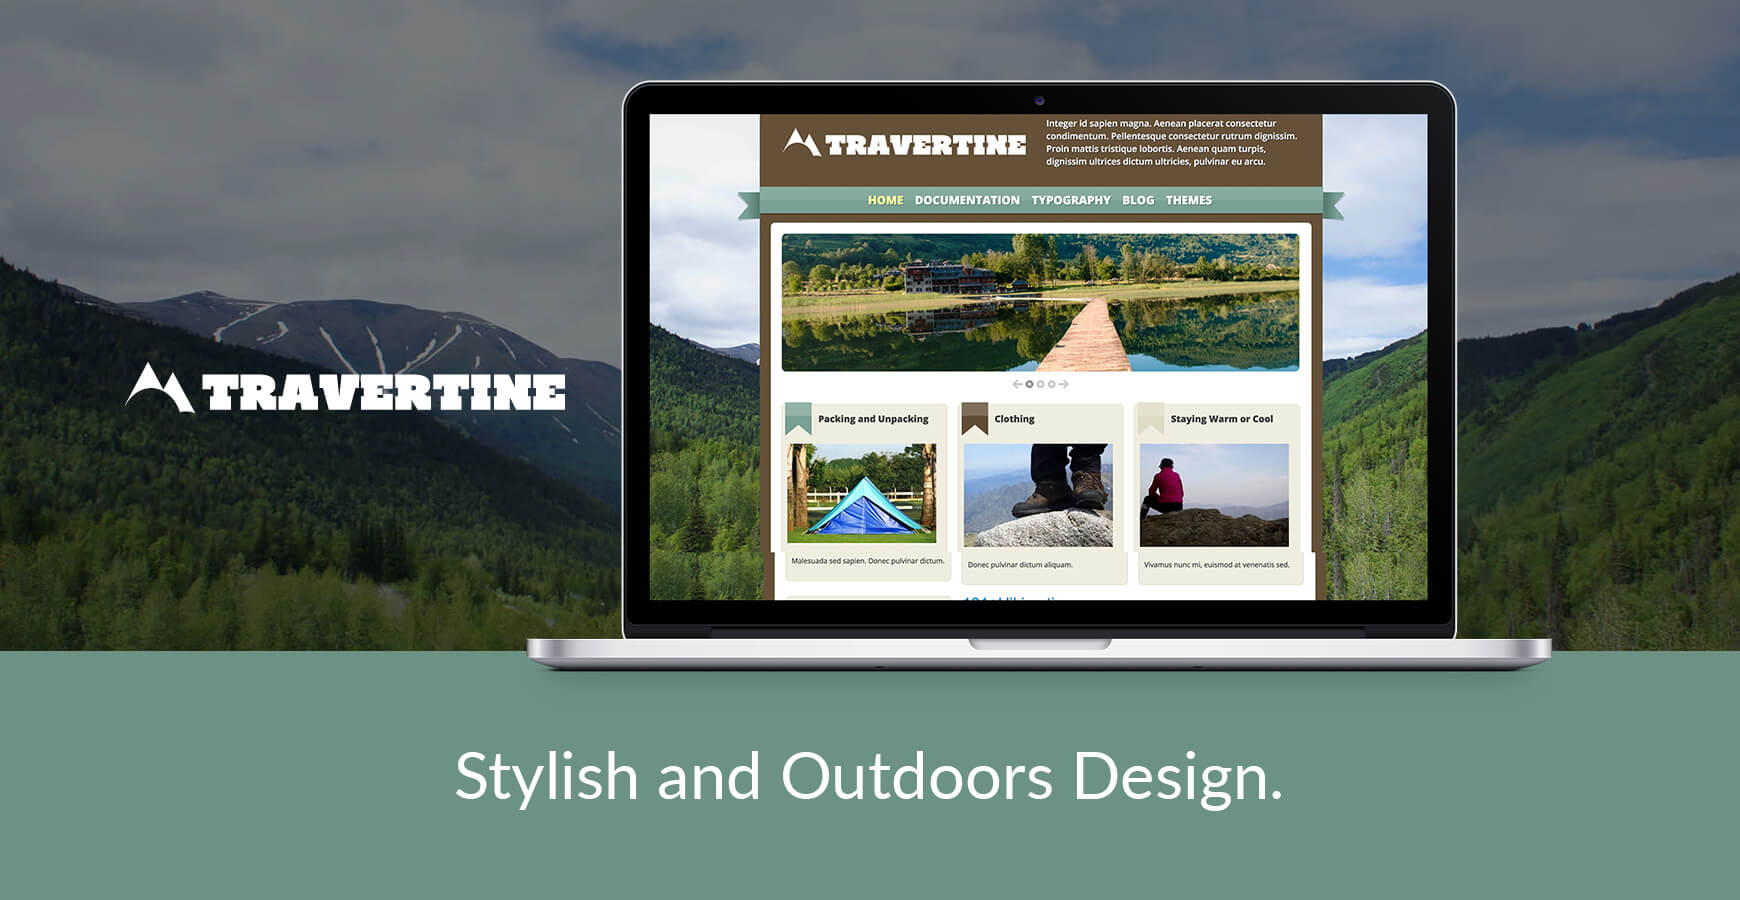 A New Version of Travertine, the Stylish, Outdoors Template